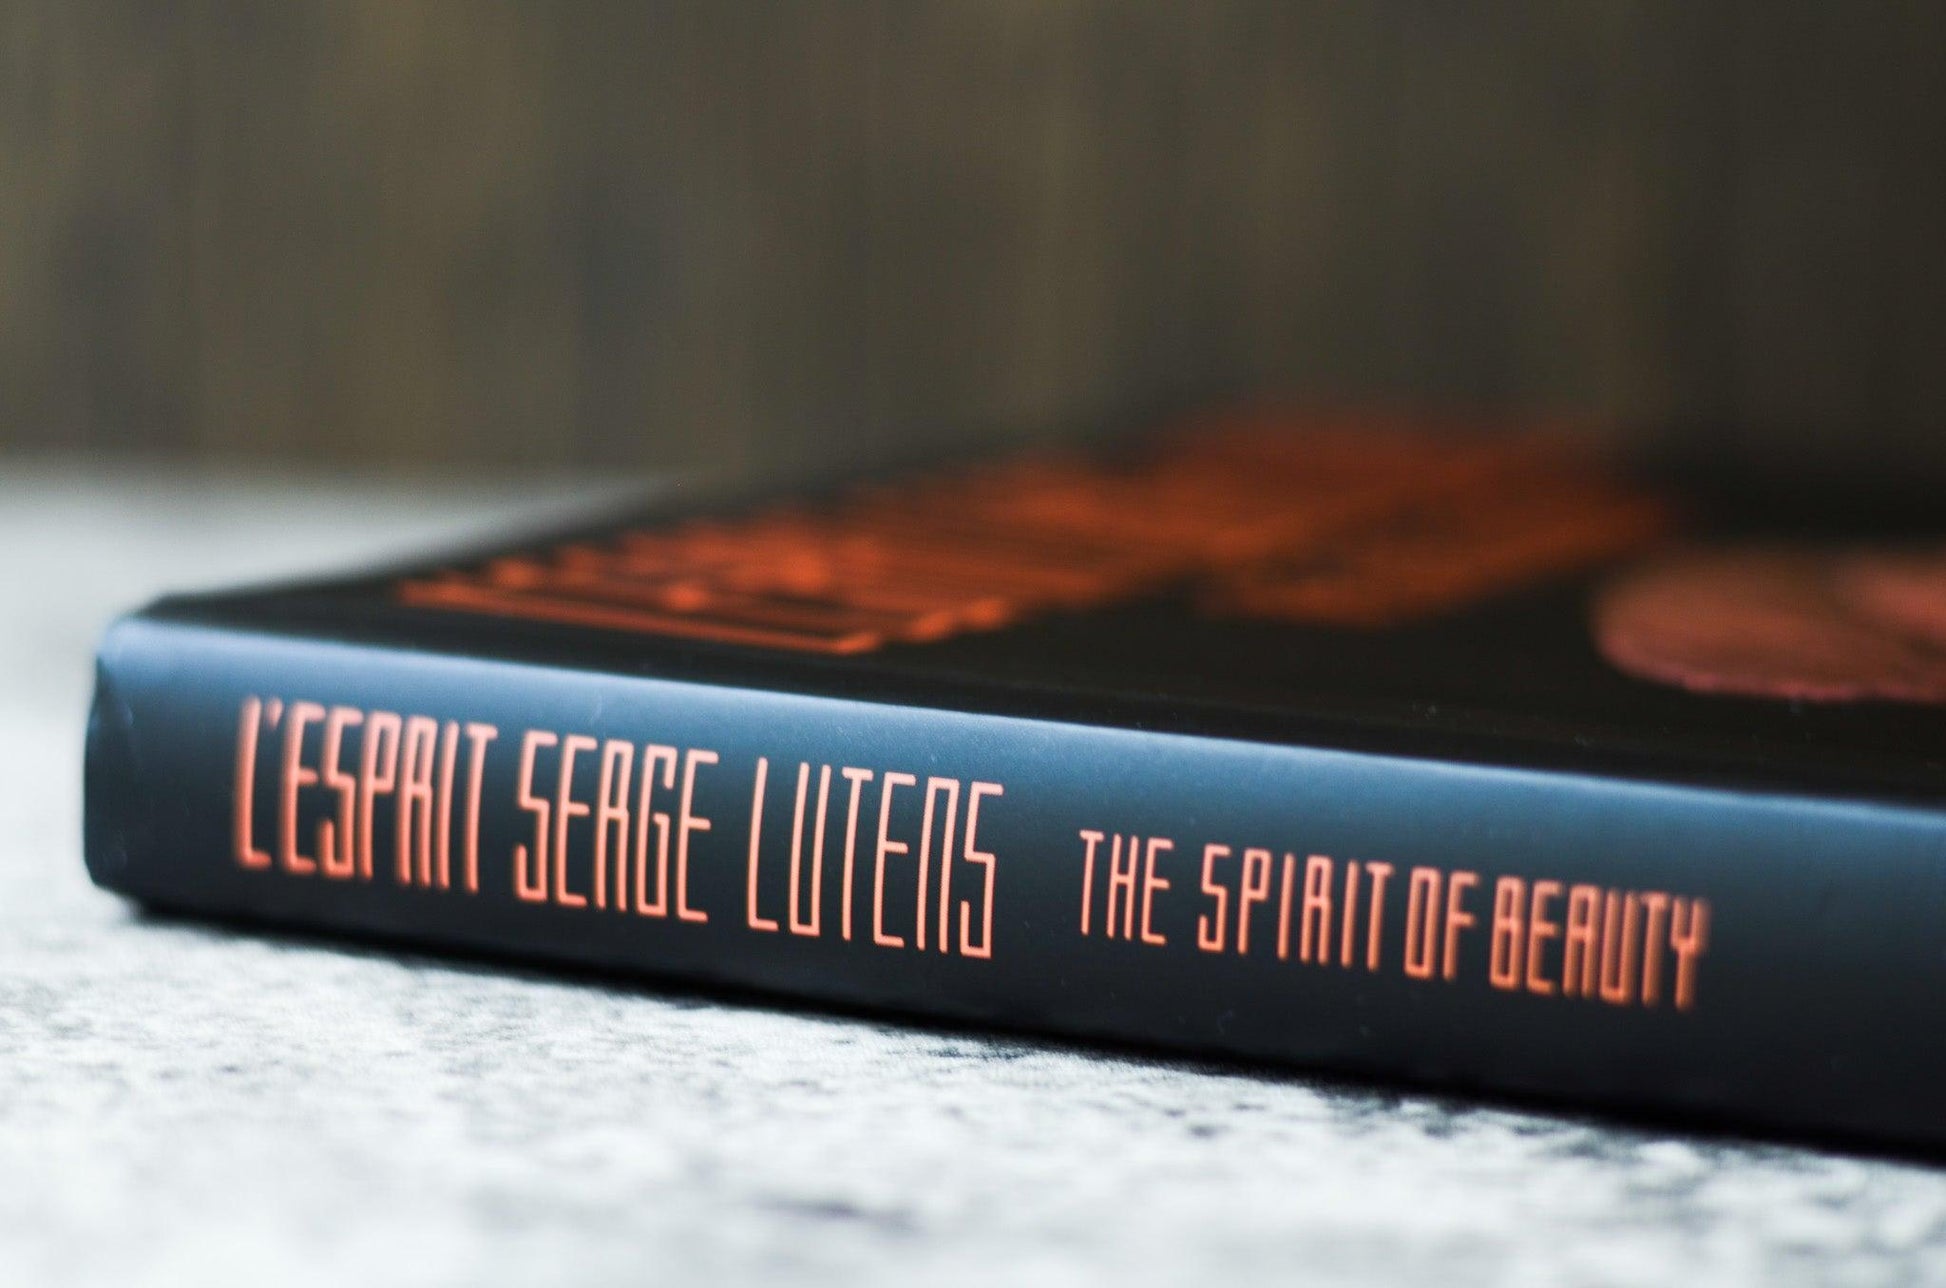 L'esprit Serge Lutens / The Spirit of Beauty / First Edition / 1992 - Precious Cache